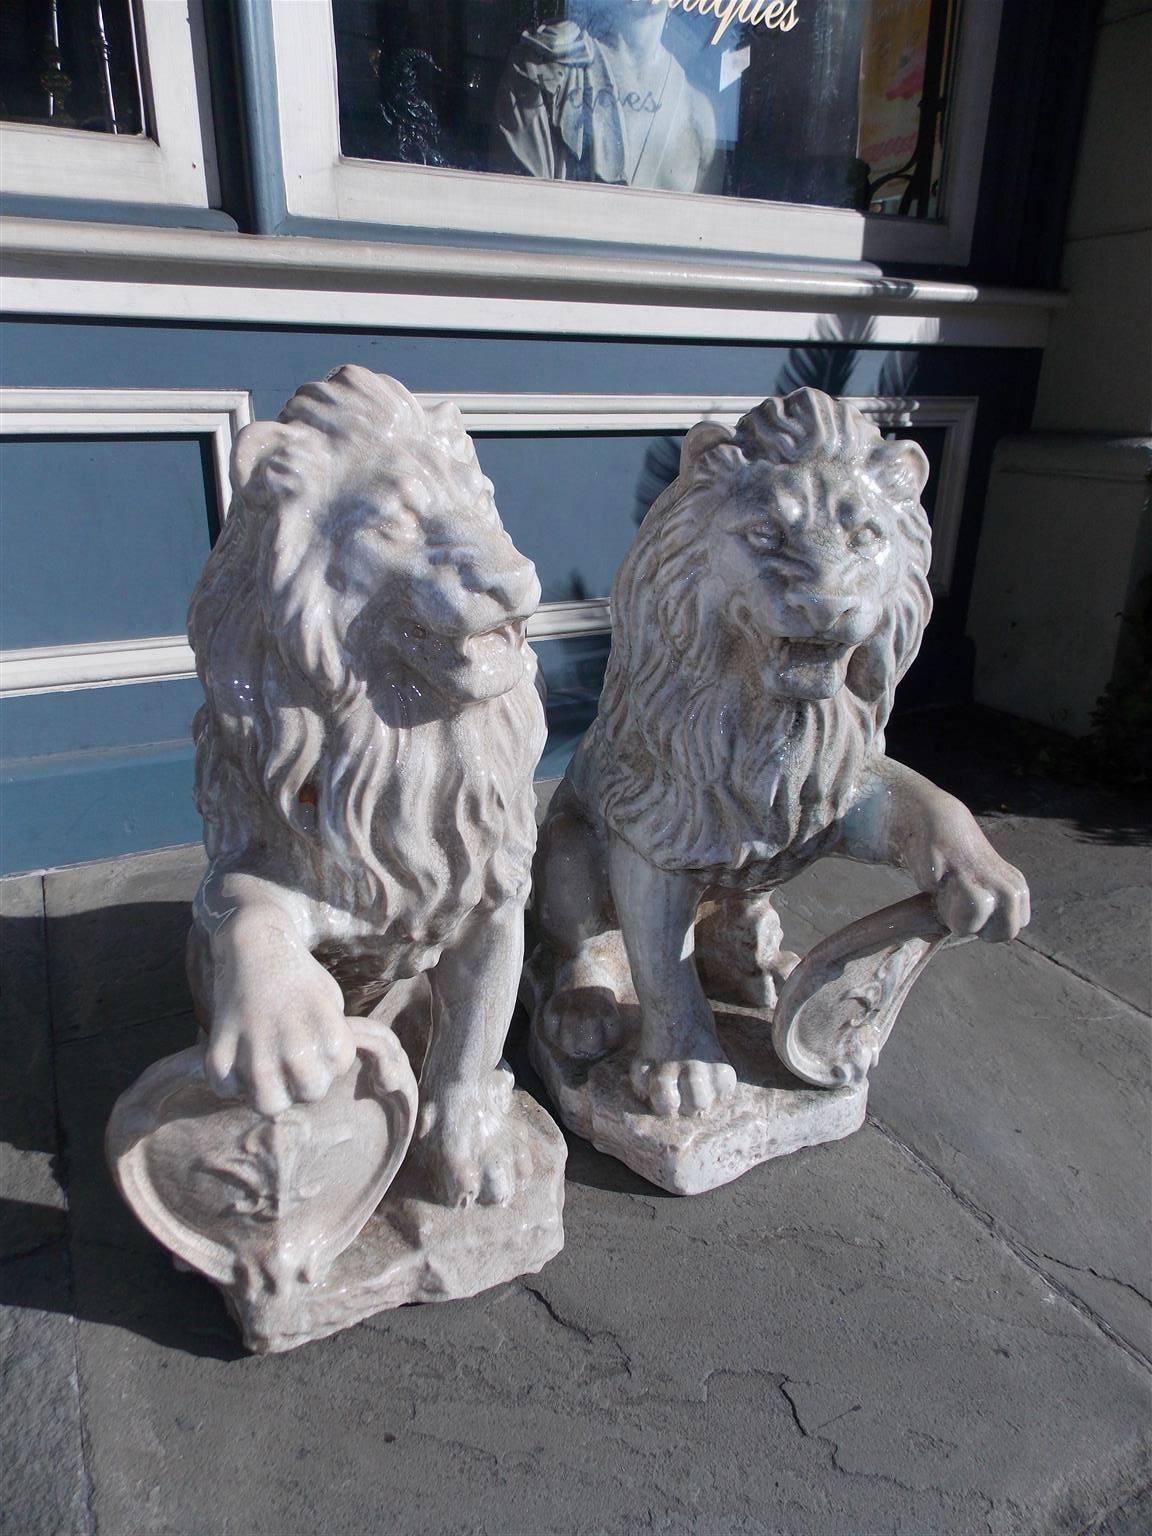 Hand-Carved Pair of French Glazed Terracotta Lions Grasping Fleur De Lis Plaques, Circa 1840